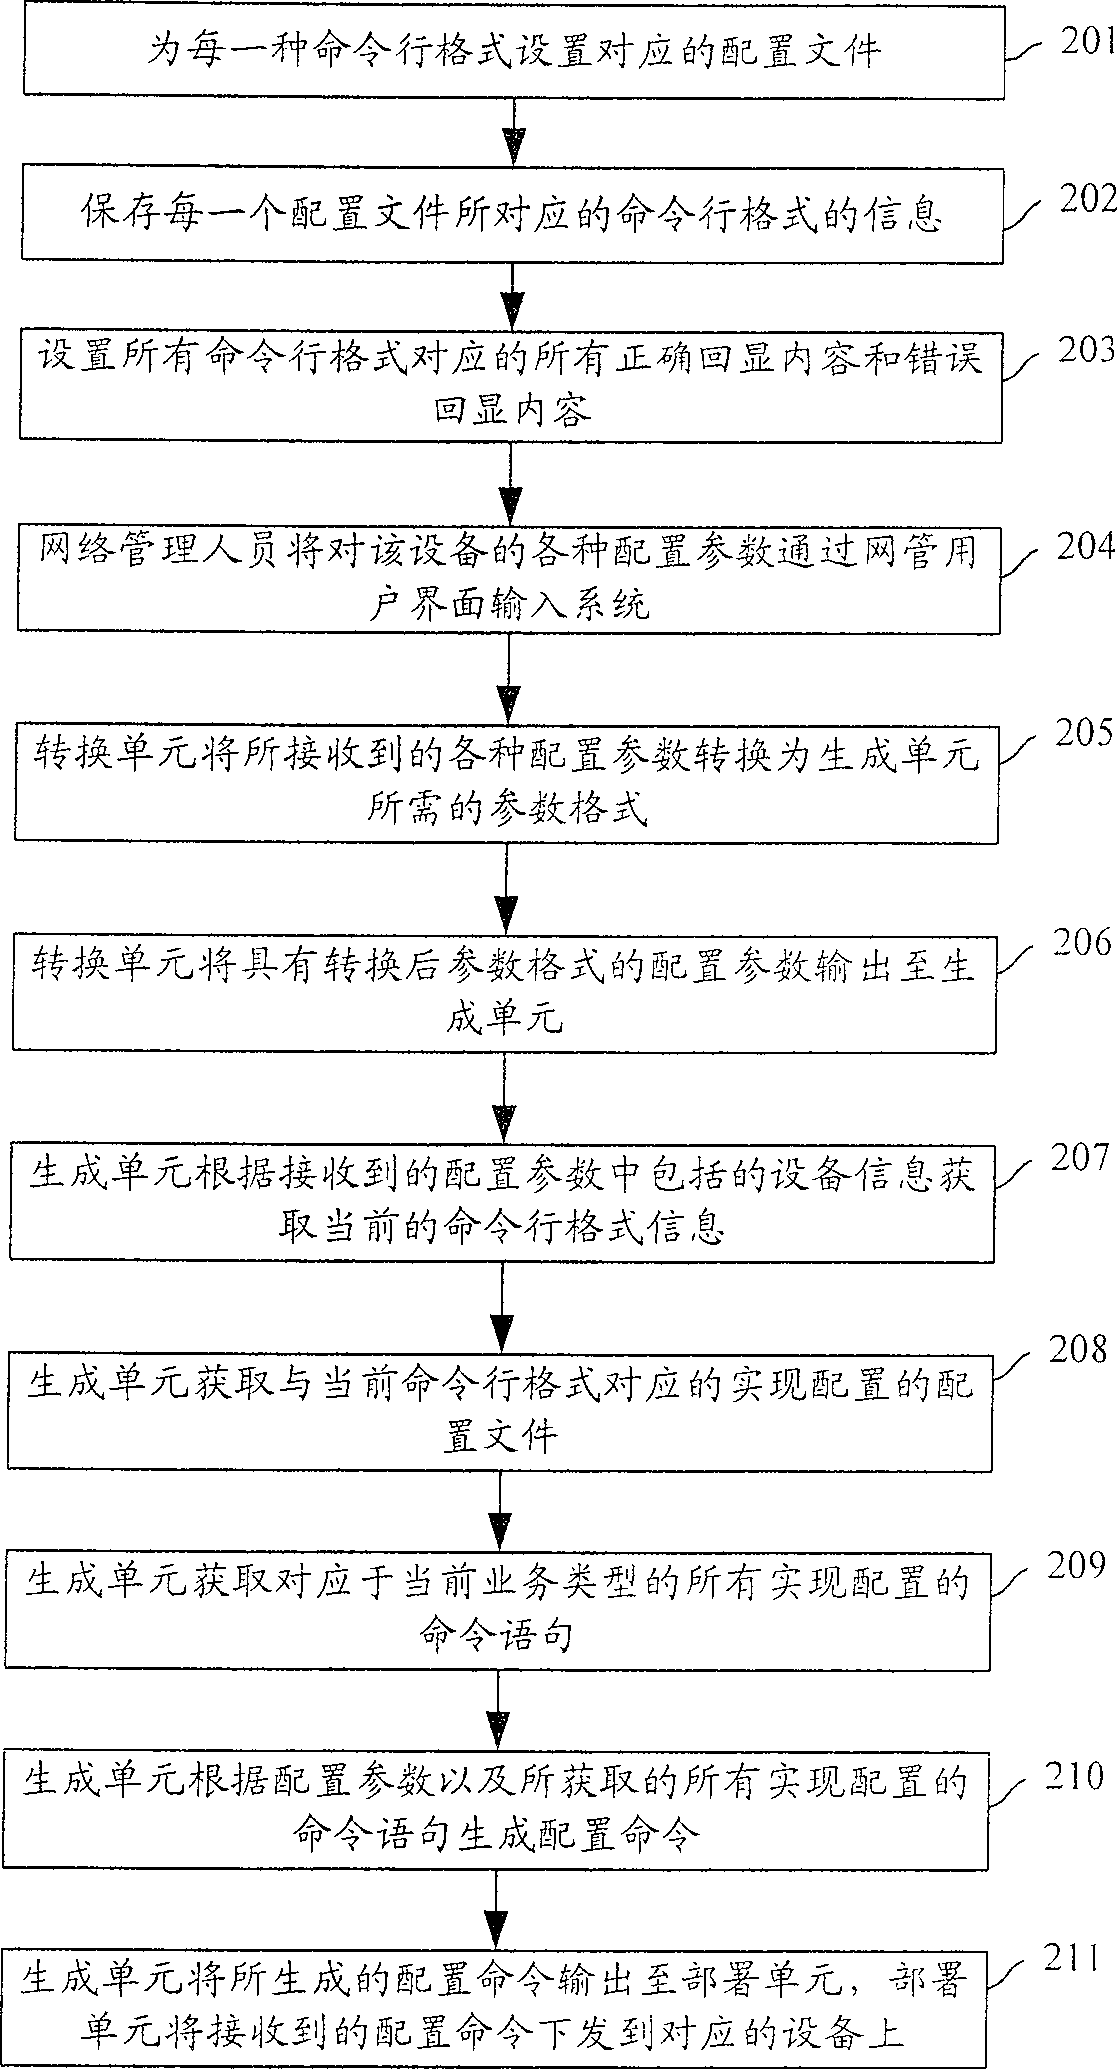 Method and system for transmitting order to lower levels